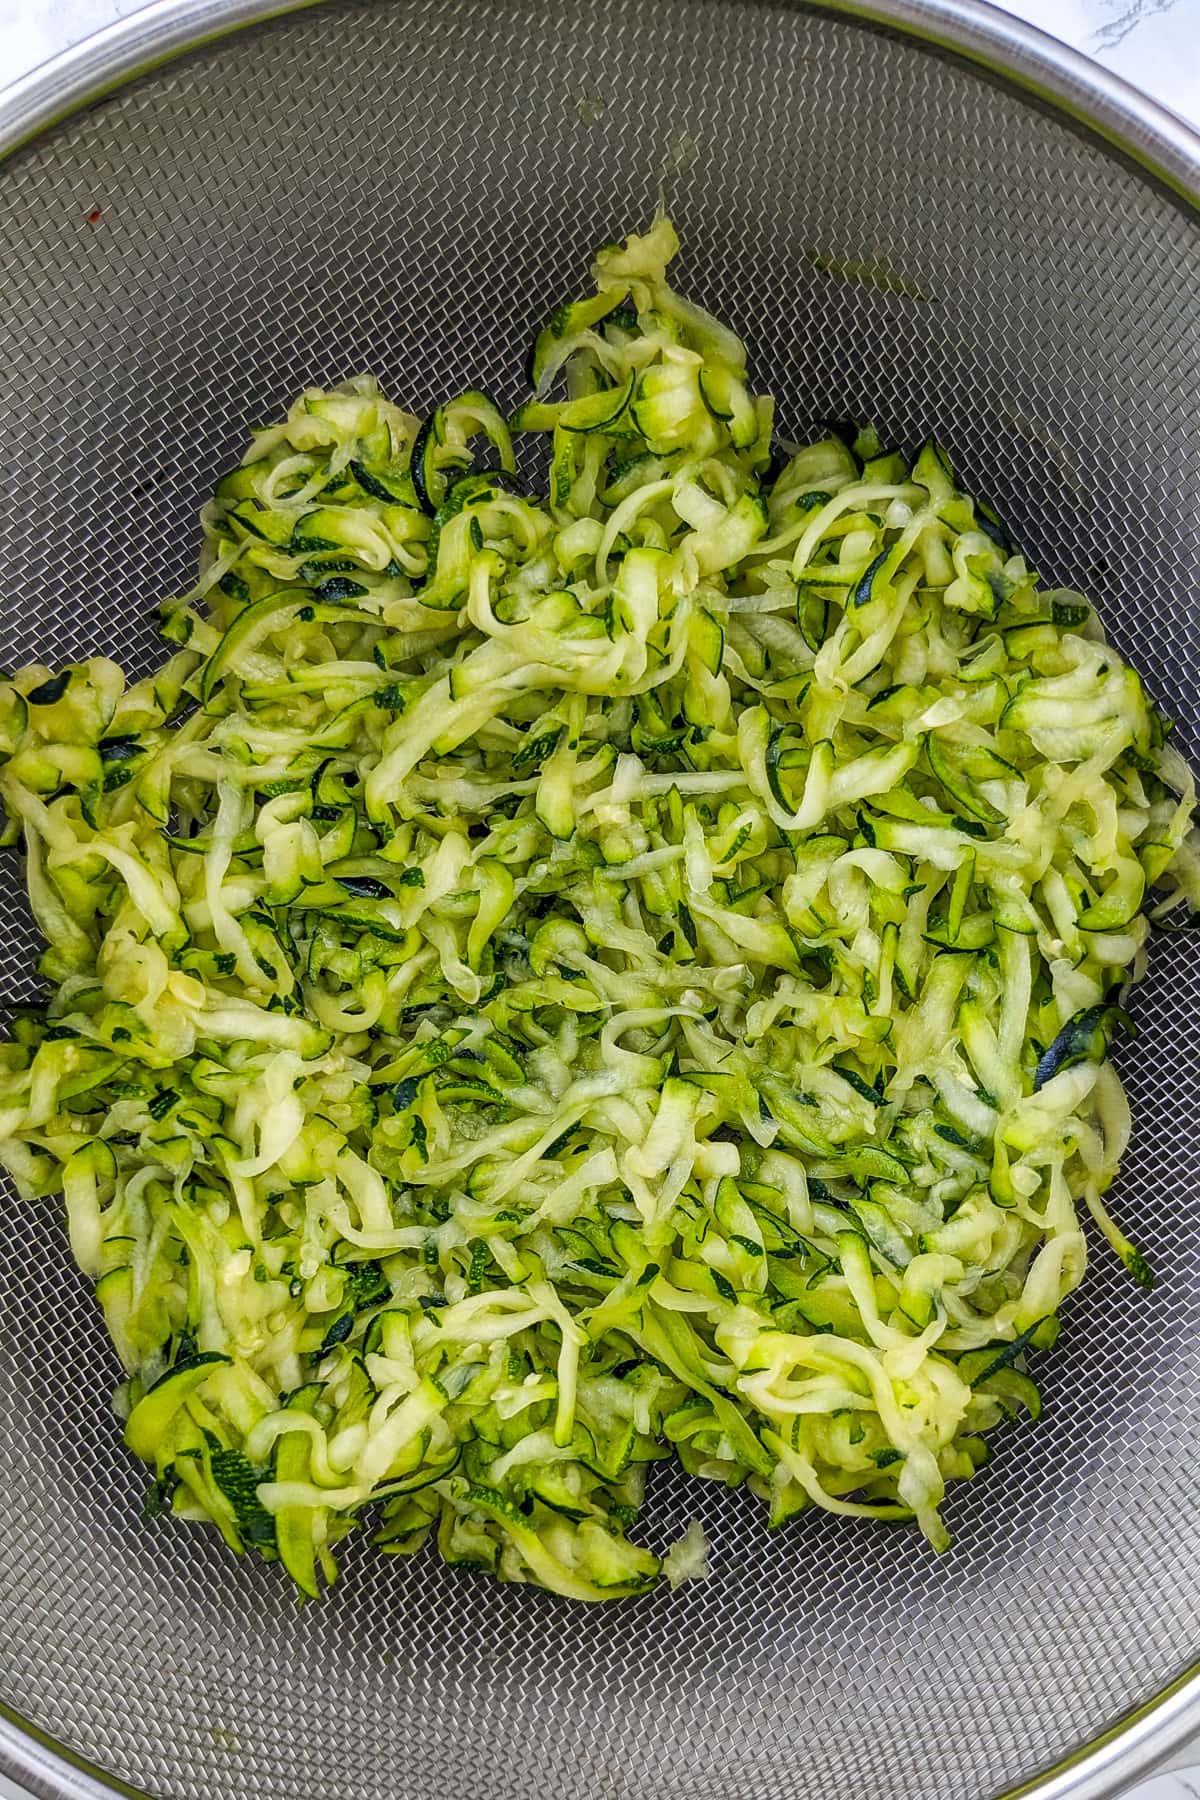 Top view of grated zucchini strained through a sieve.